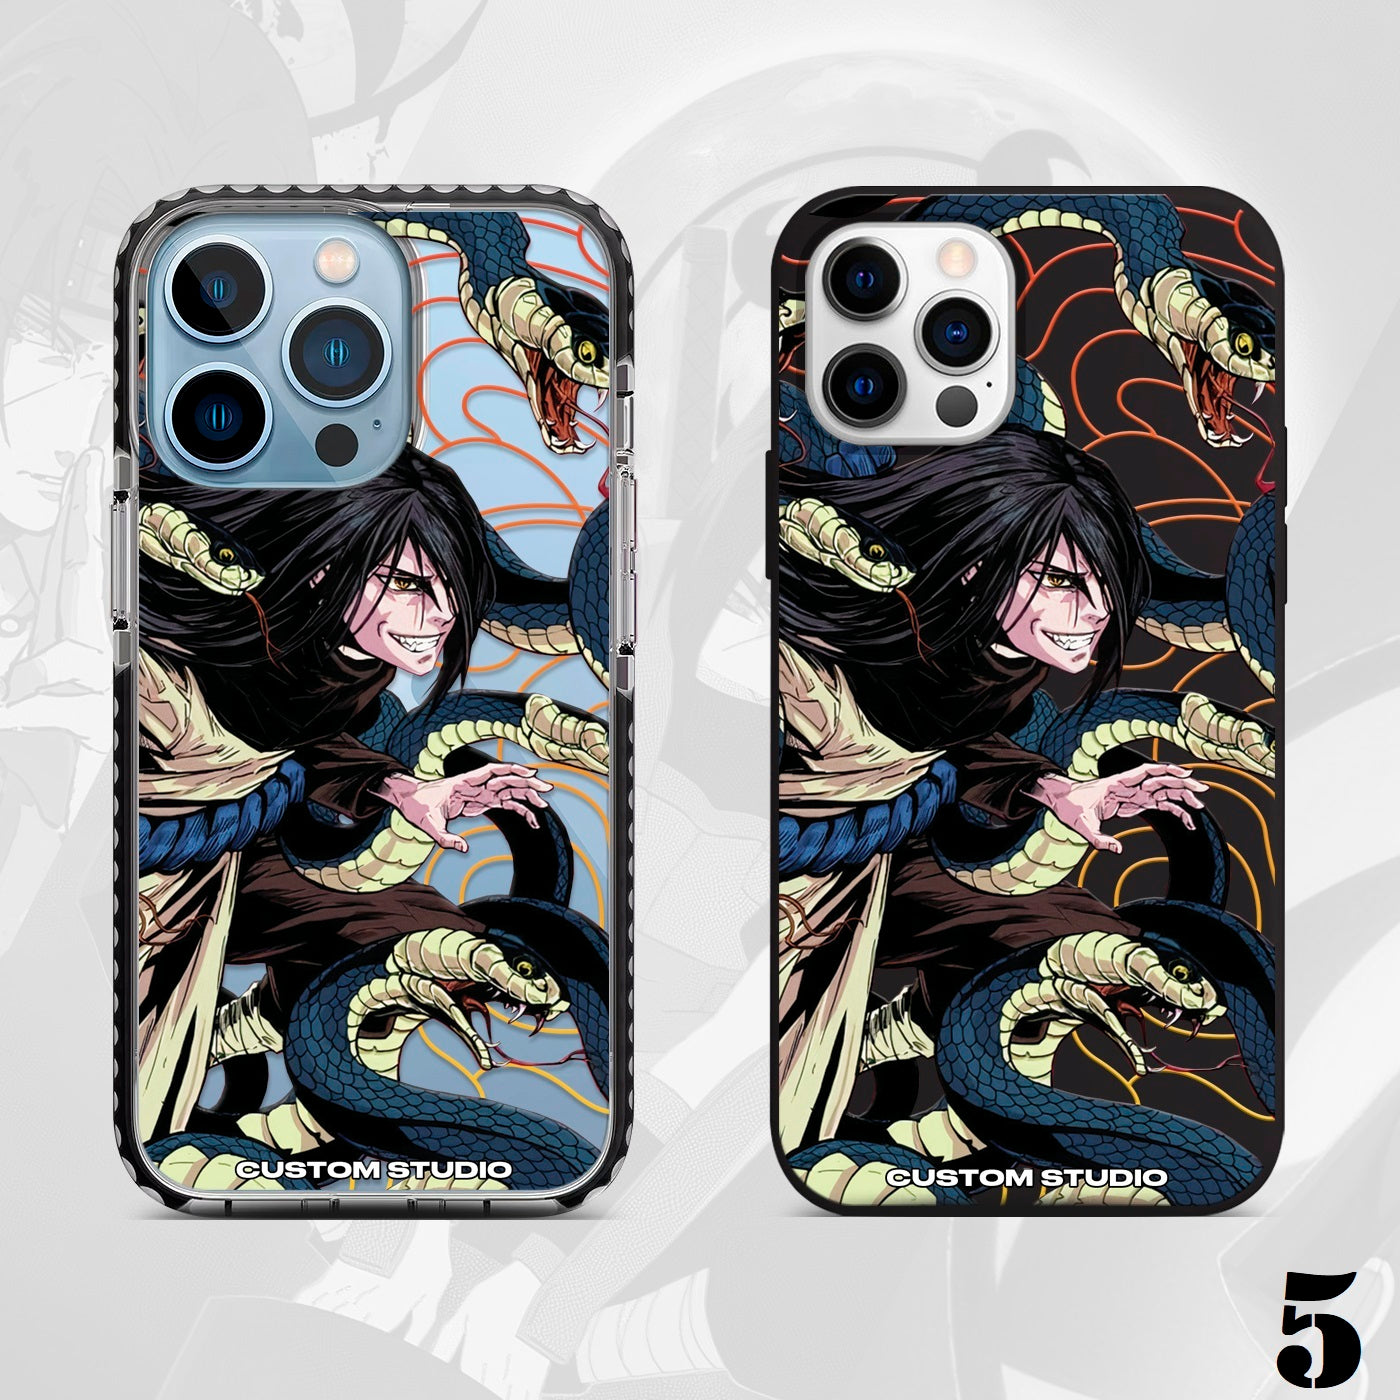 Series of Naruto Cases